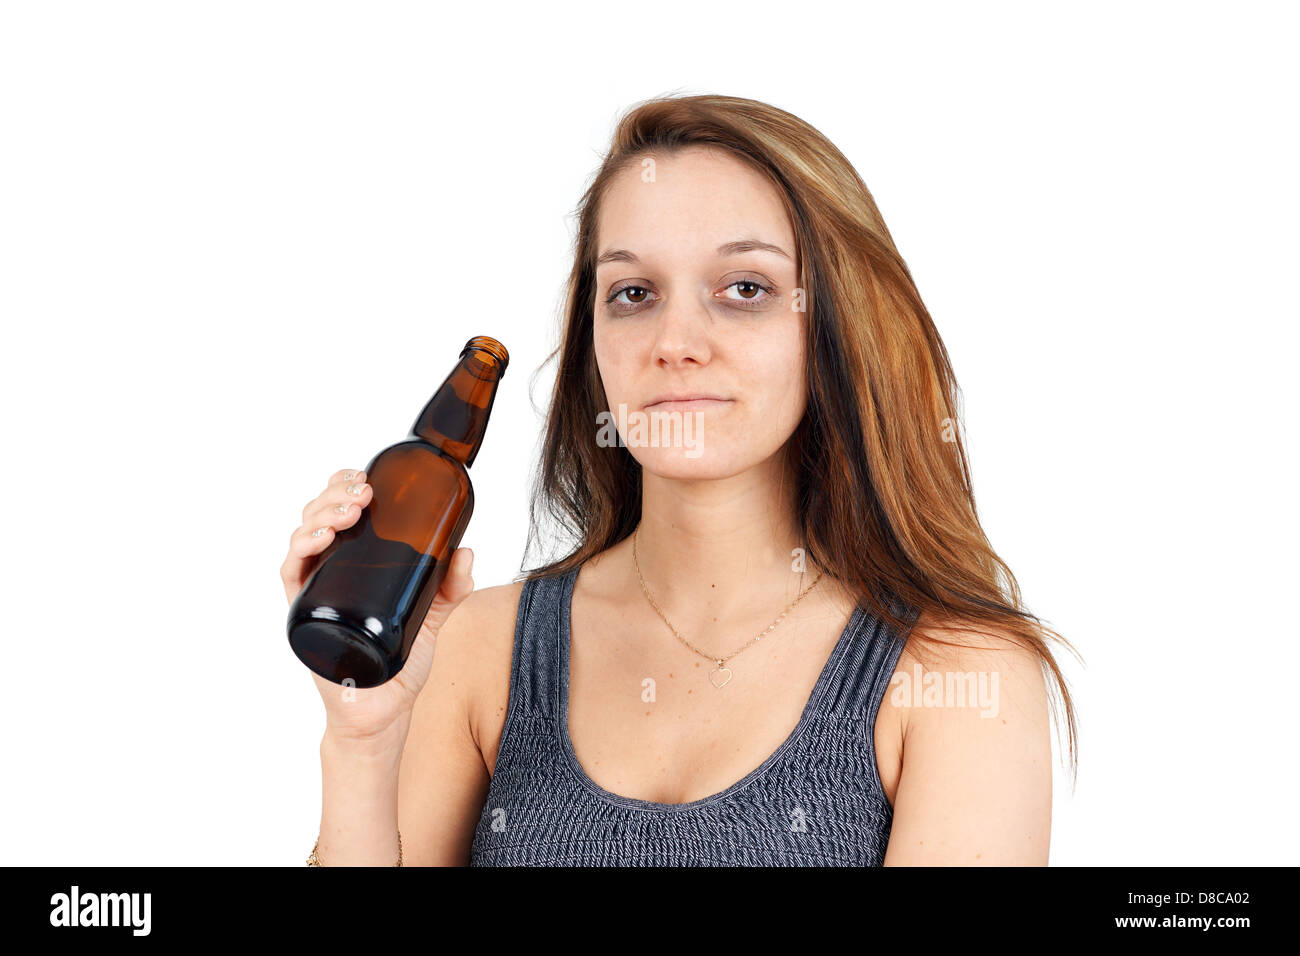 Girl With A Bad Appearance, In A Bra And Mask For Sleeping, Holds A Bottle  Of Alcohol And Looks At It. Stock Photo, Picture and Royalty Free Image.  Image 92392163.